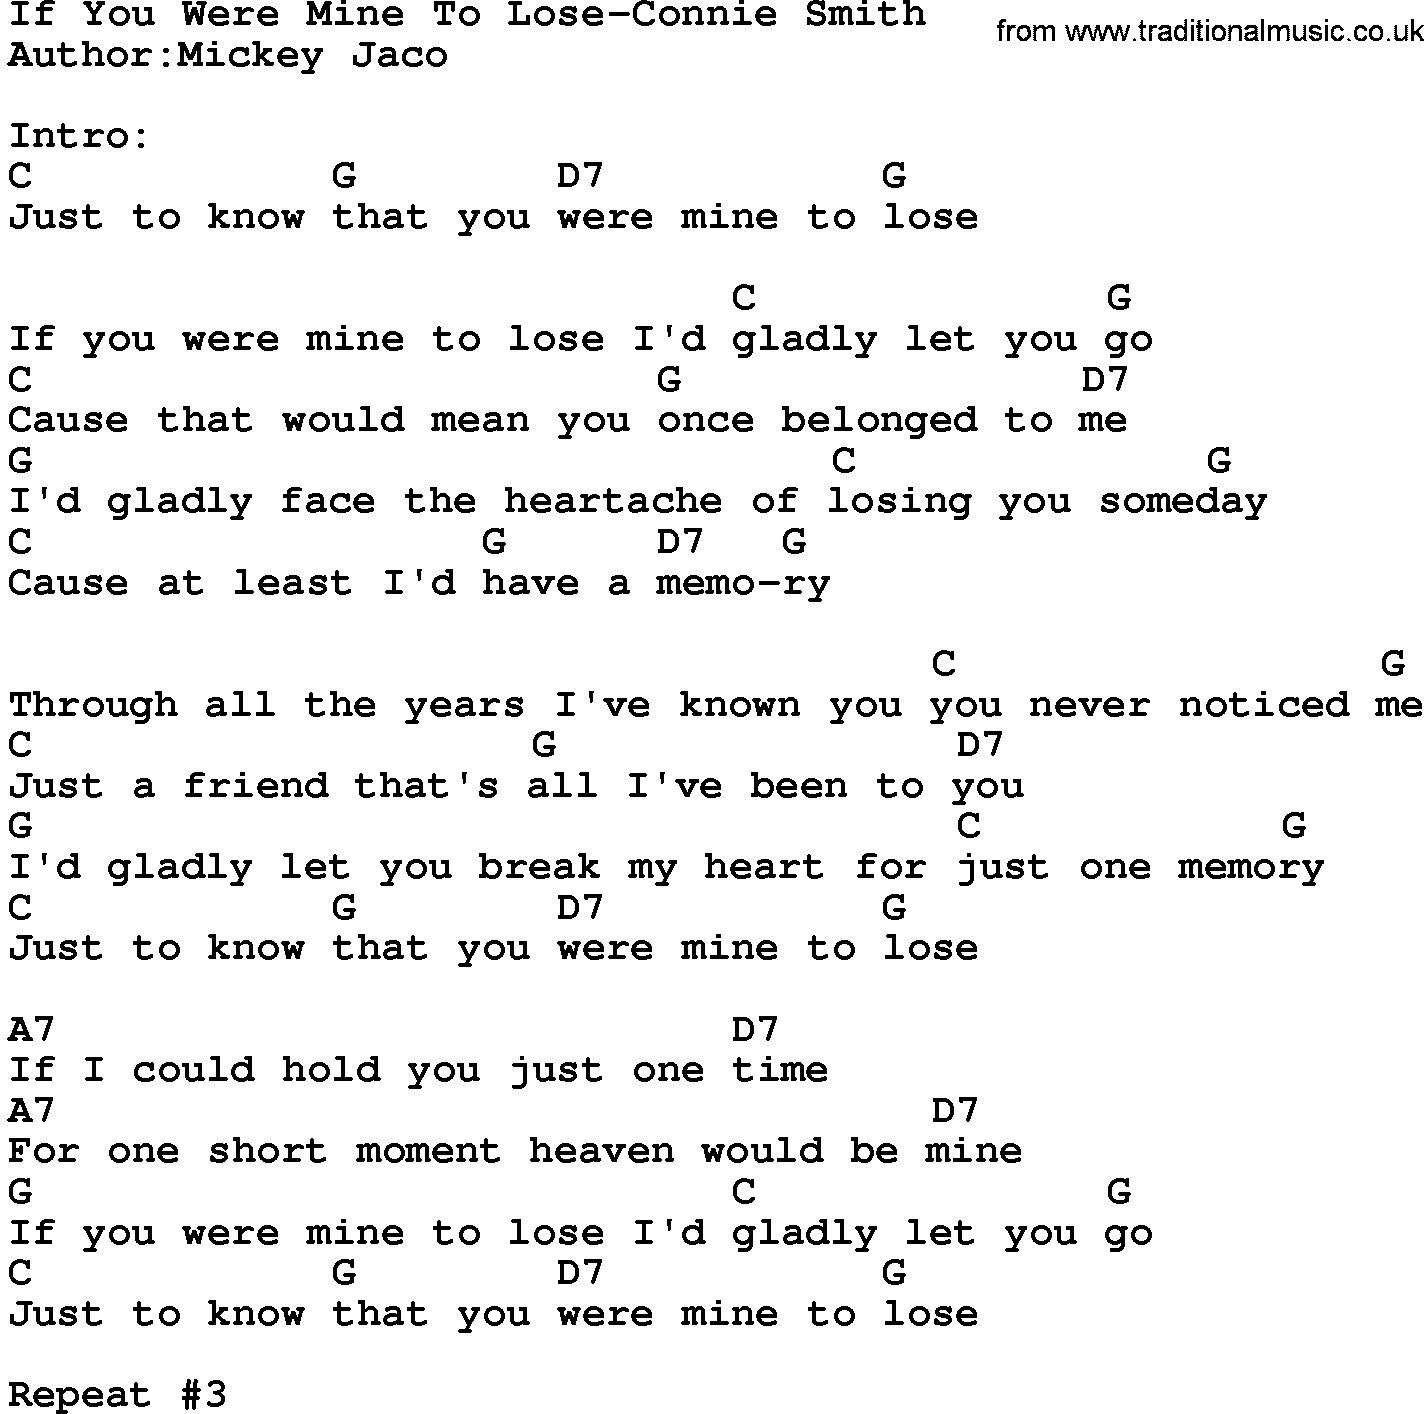 Country music song: If You Were Mine To Lose-Connie Smith lyrics and chords